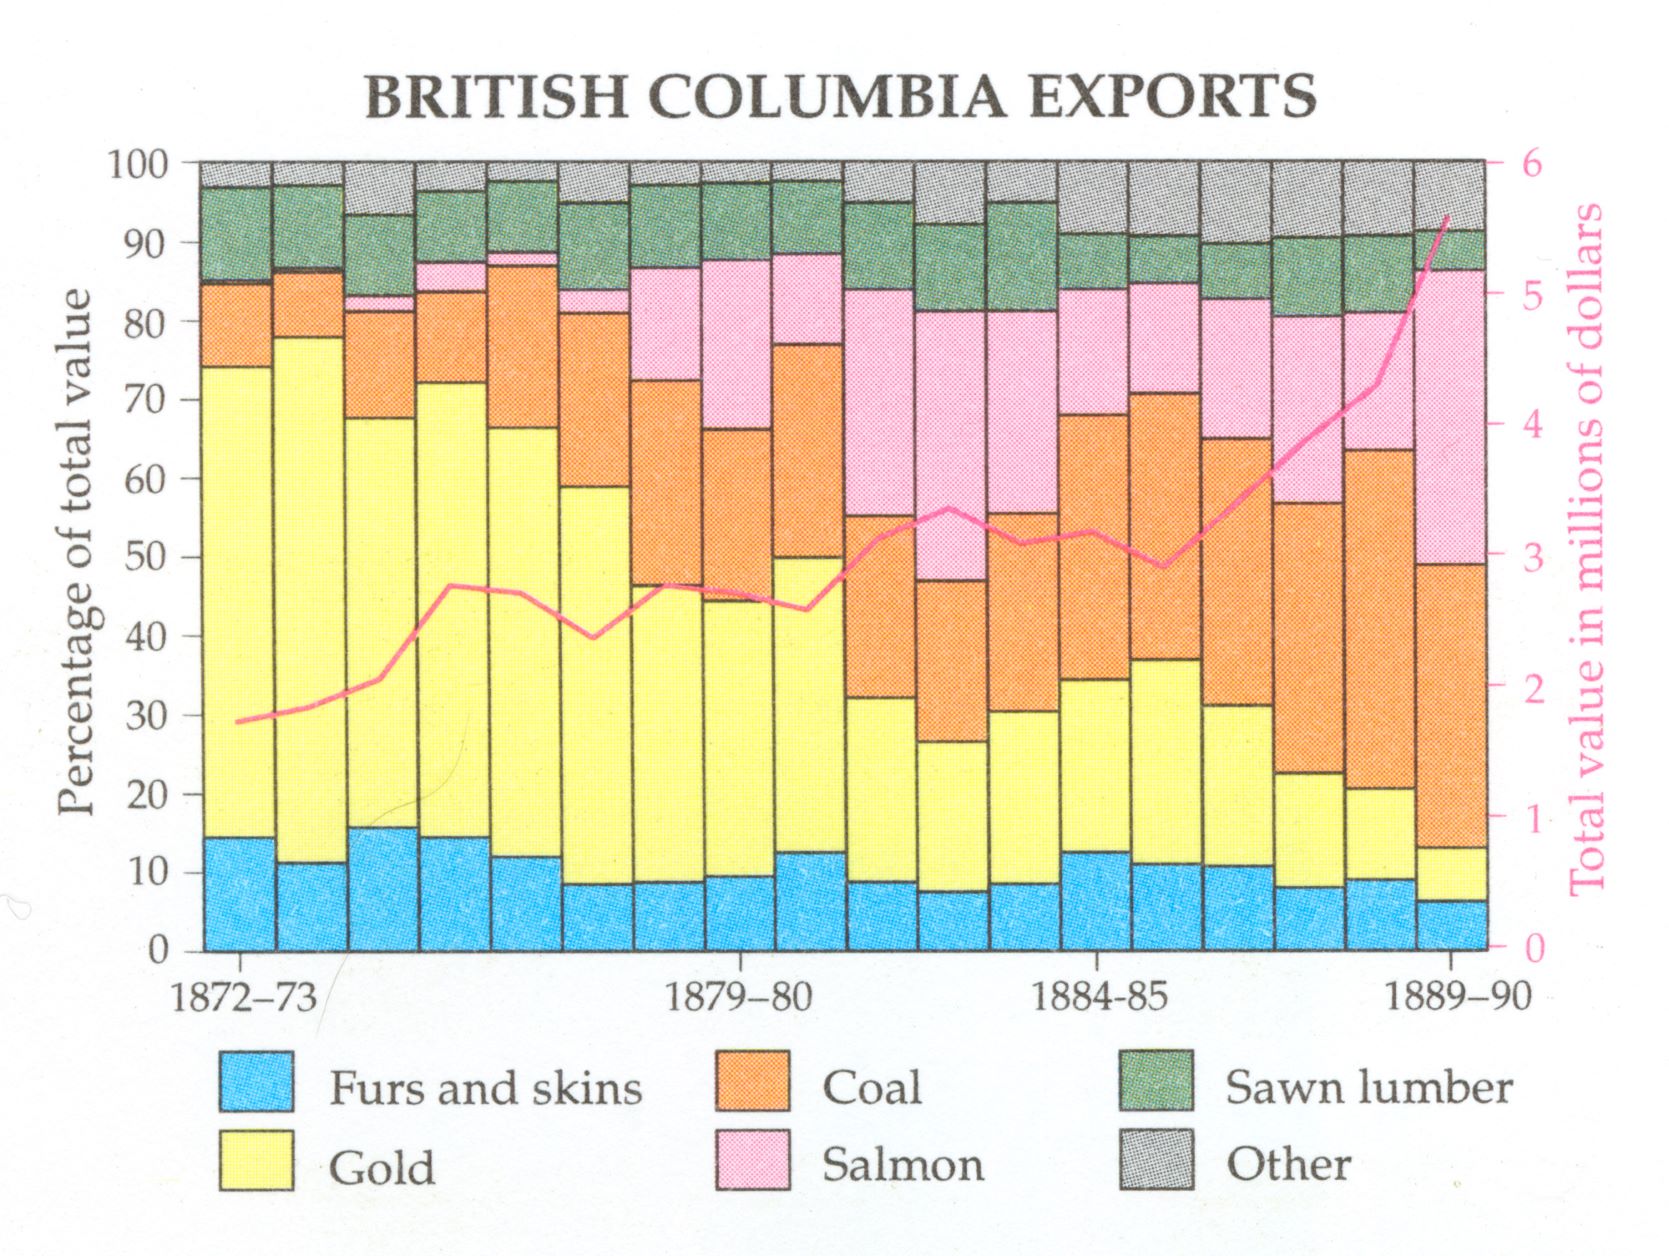 Chart depicting British Columbia's waterborne exports between 1872 and 1890